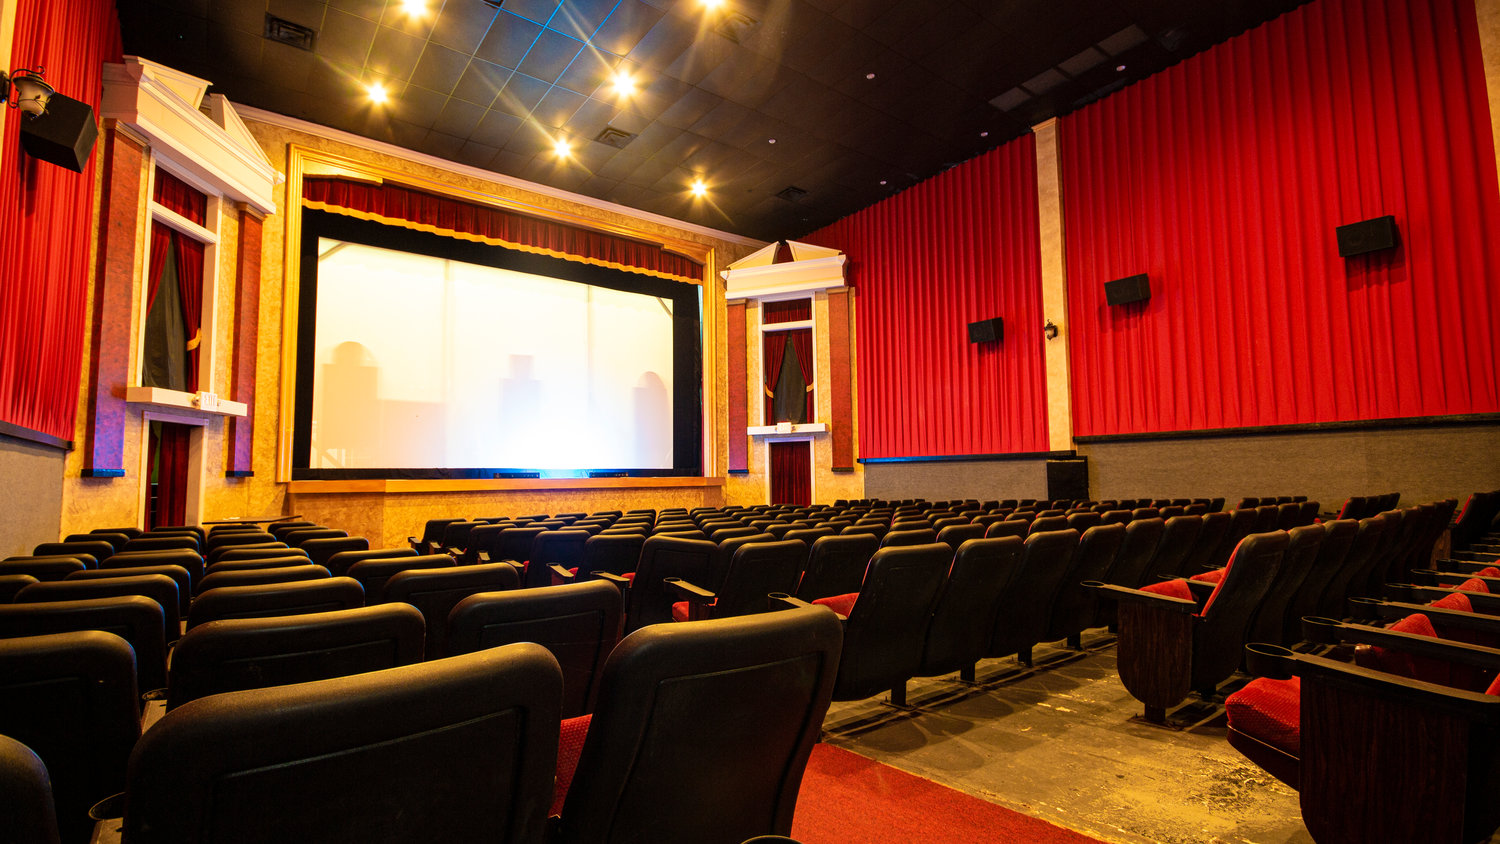 The redesigned interior of the Lynn Theatre makes the most of some of its original features